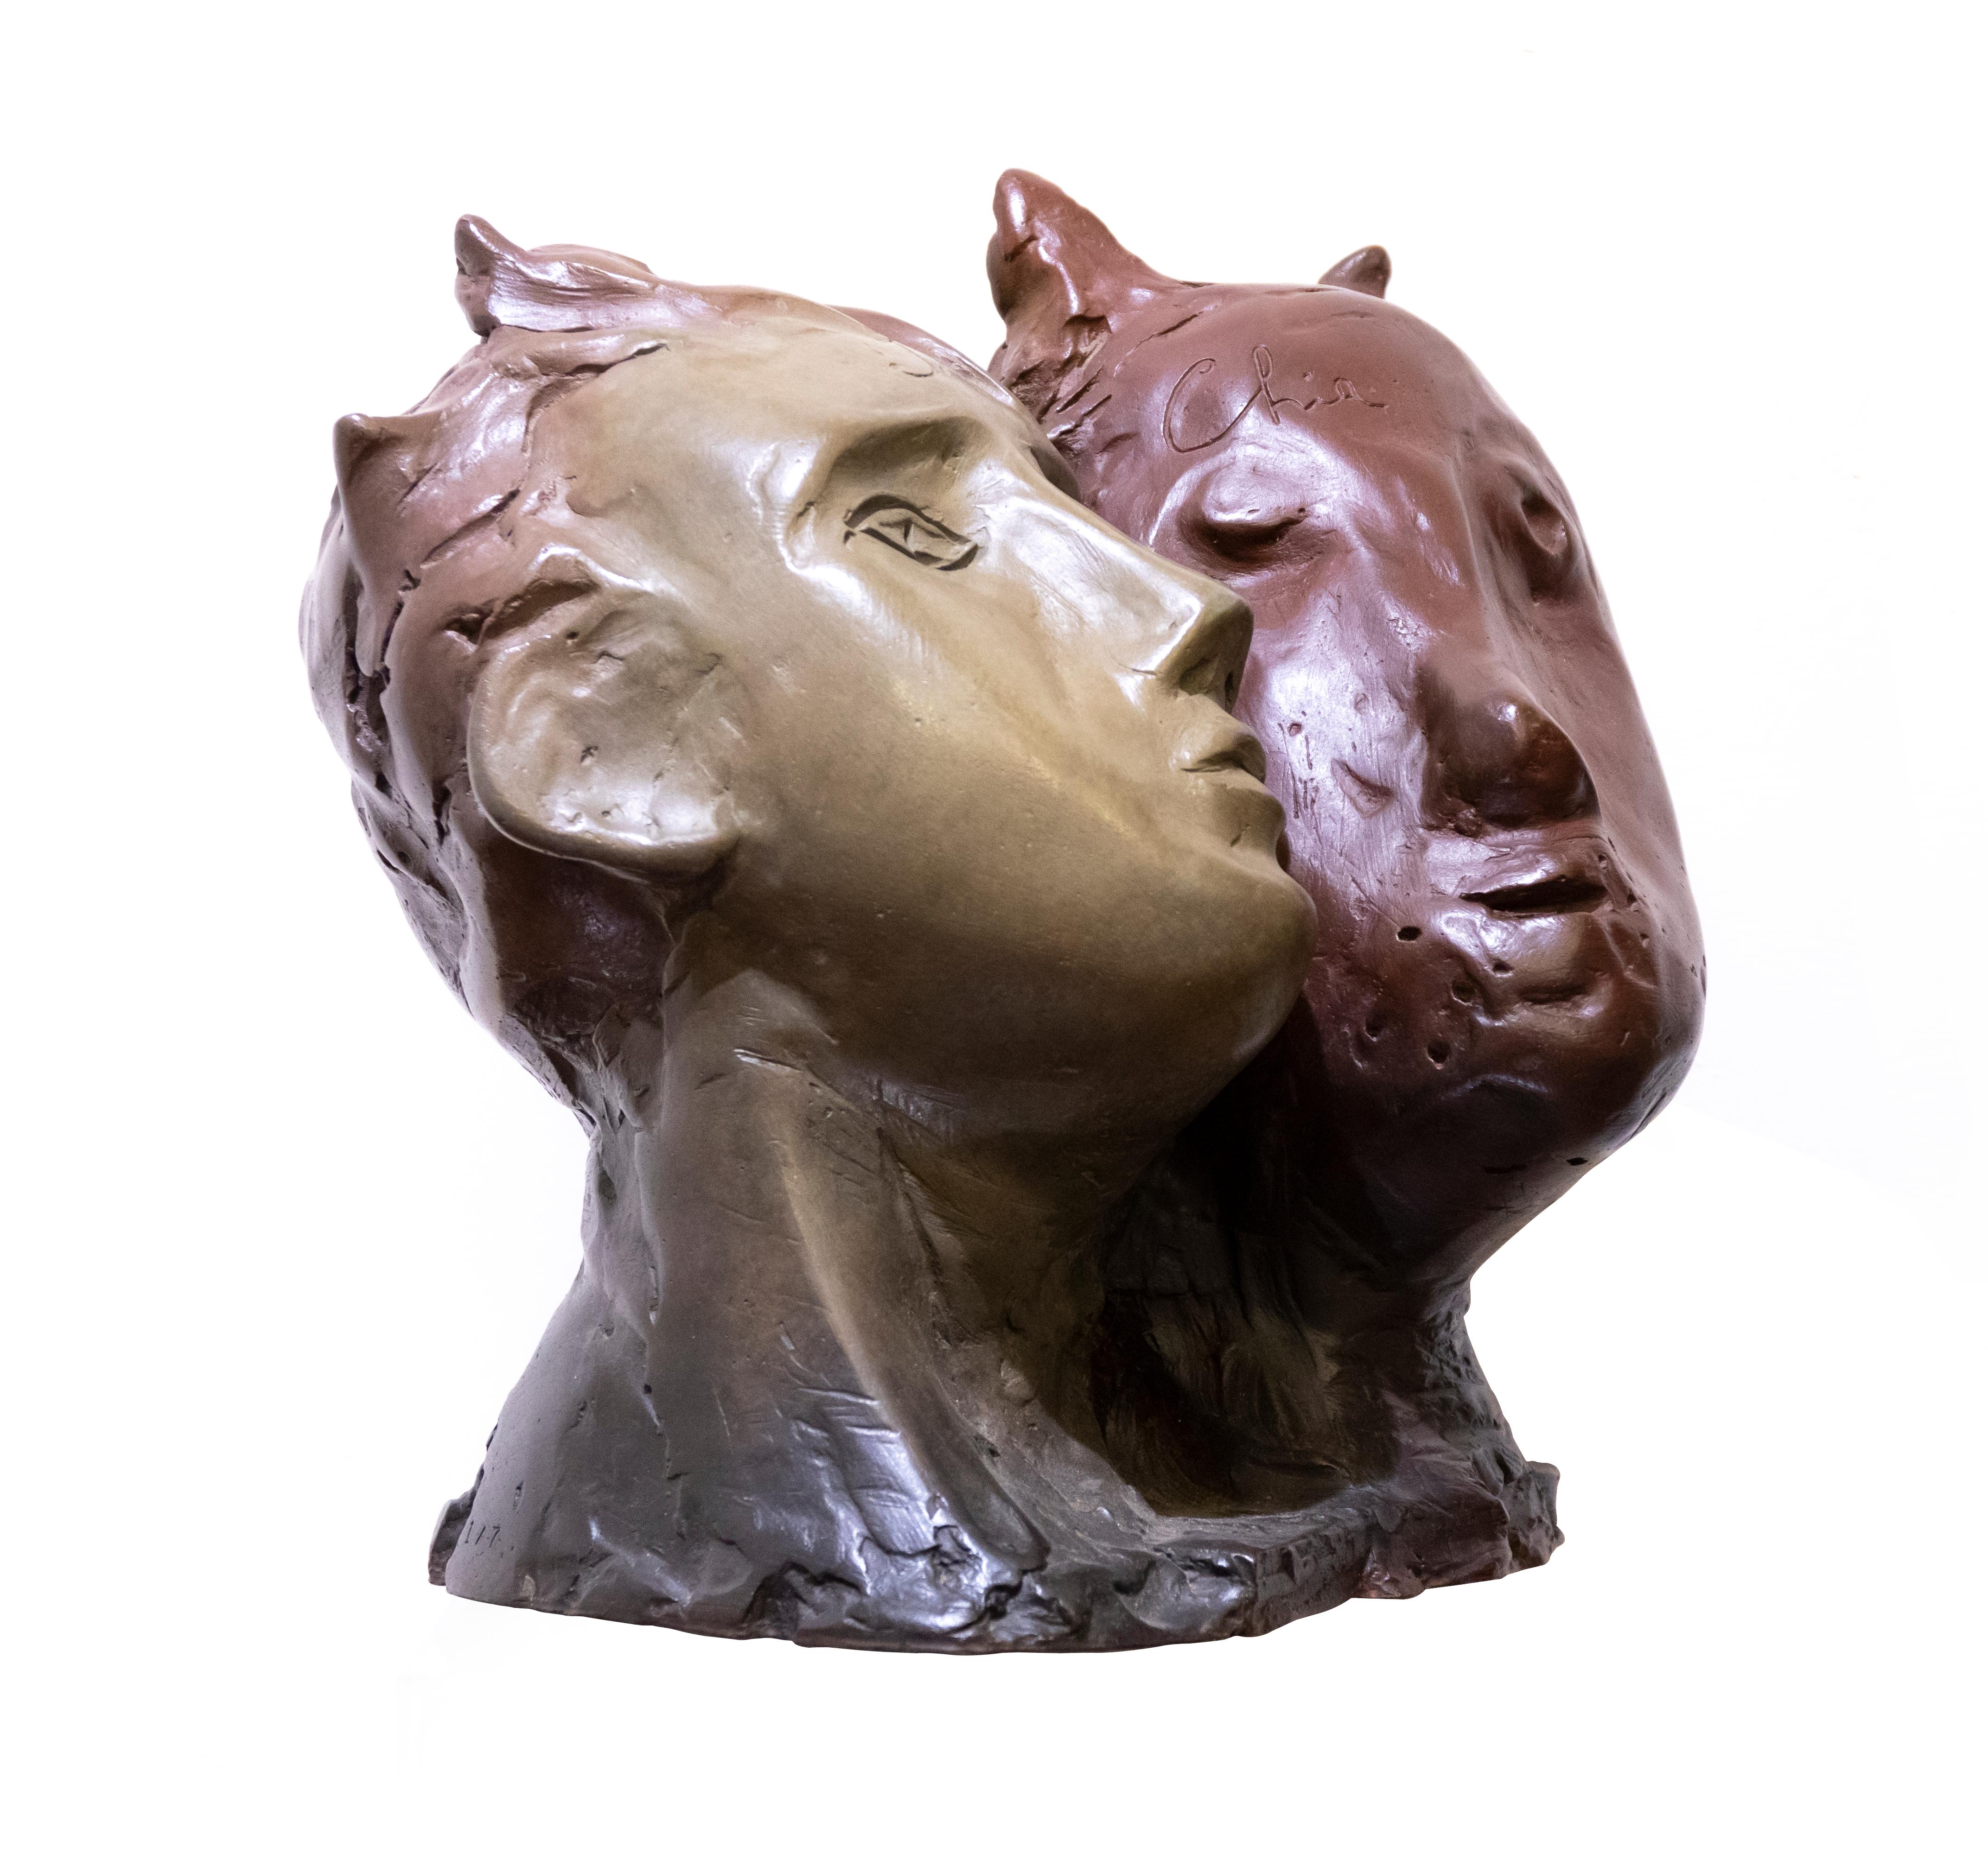 Youth and the Devil is an original Contemporary Artwork realized by Sandro Chia (born 1946) in 1993/1994. 

Original Bronze and Wax.

Dimension: 33.5 x 34 x 29 cm.

Hand-signed on the upper side: 